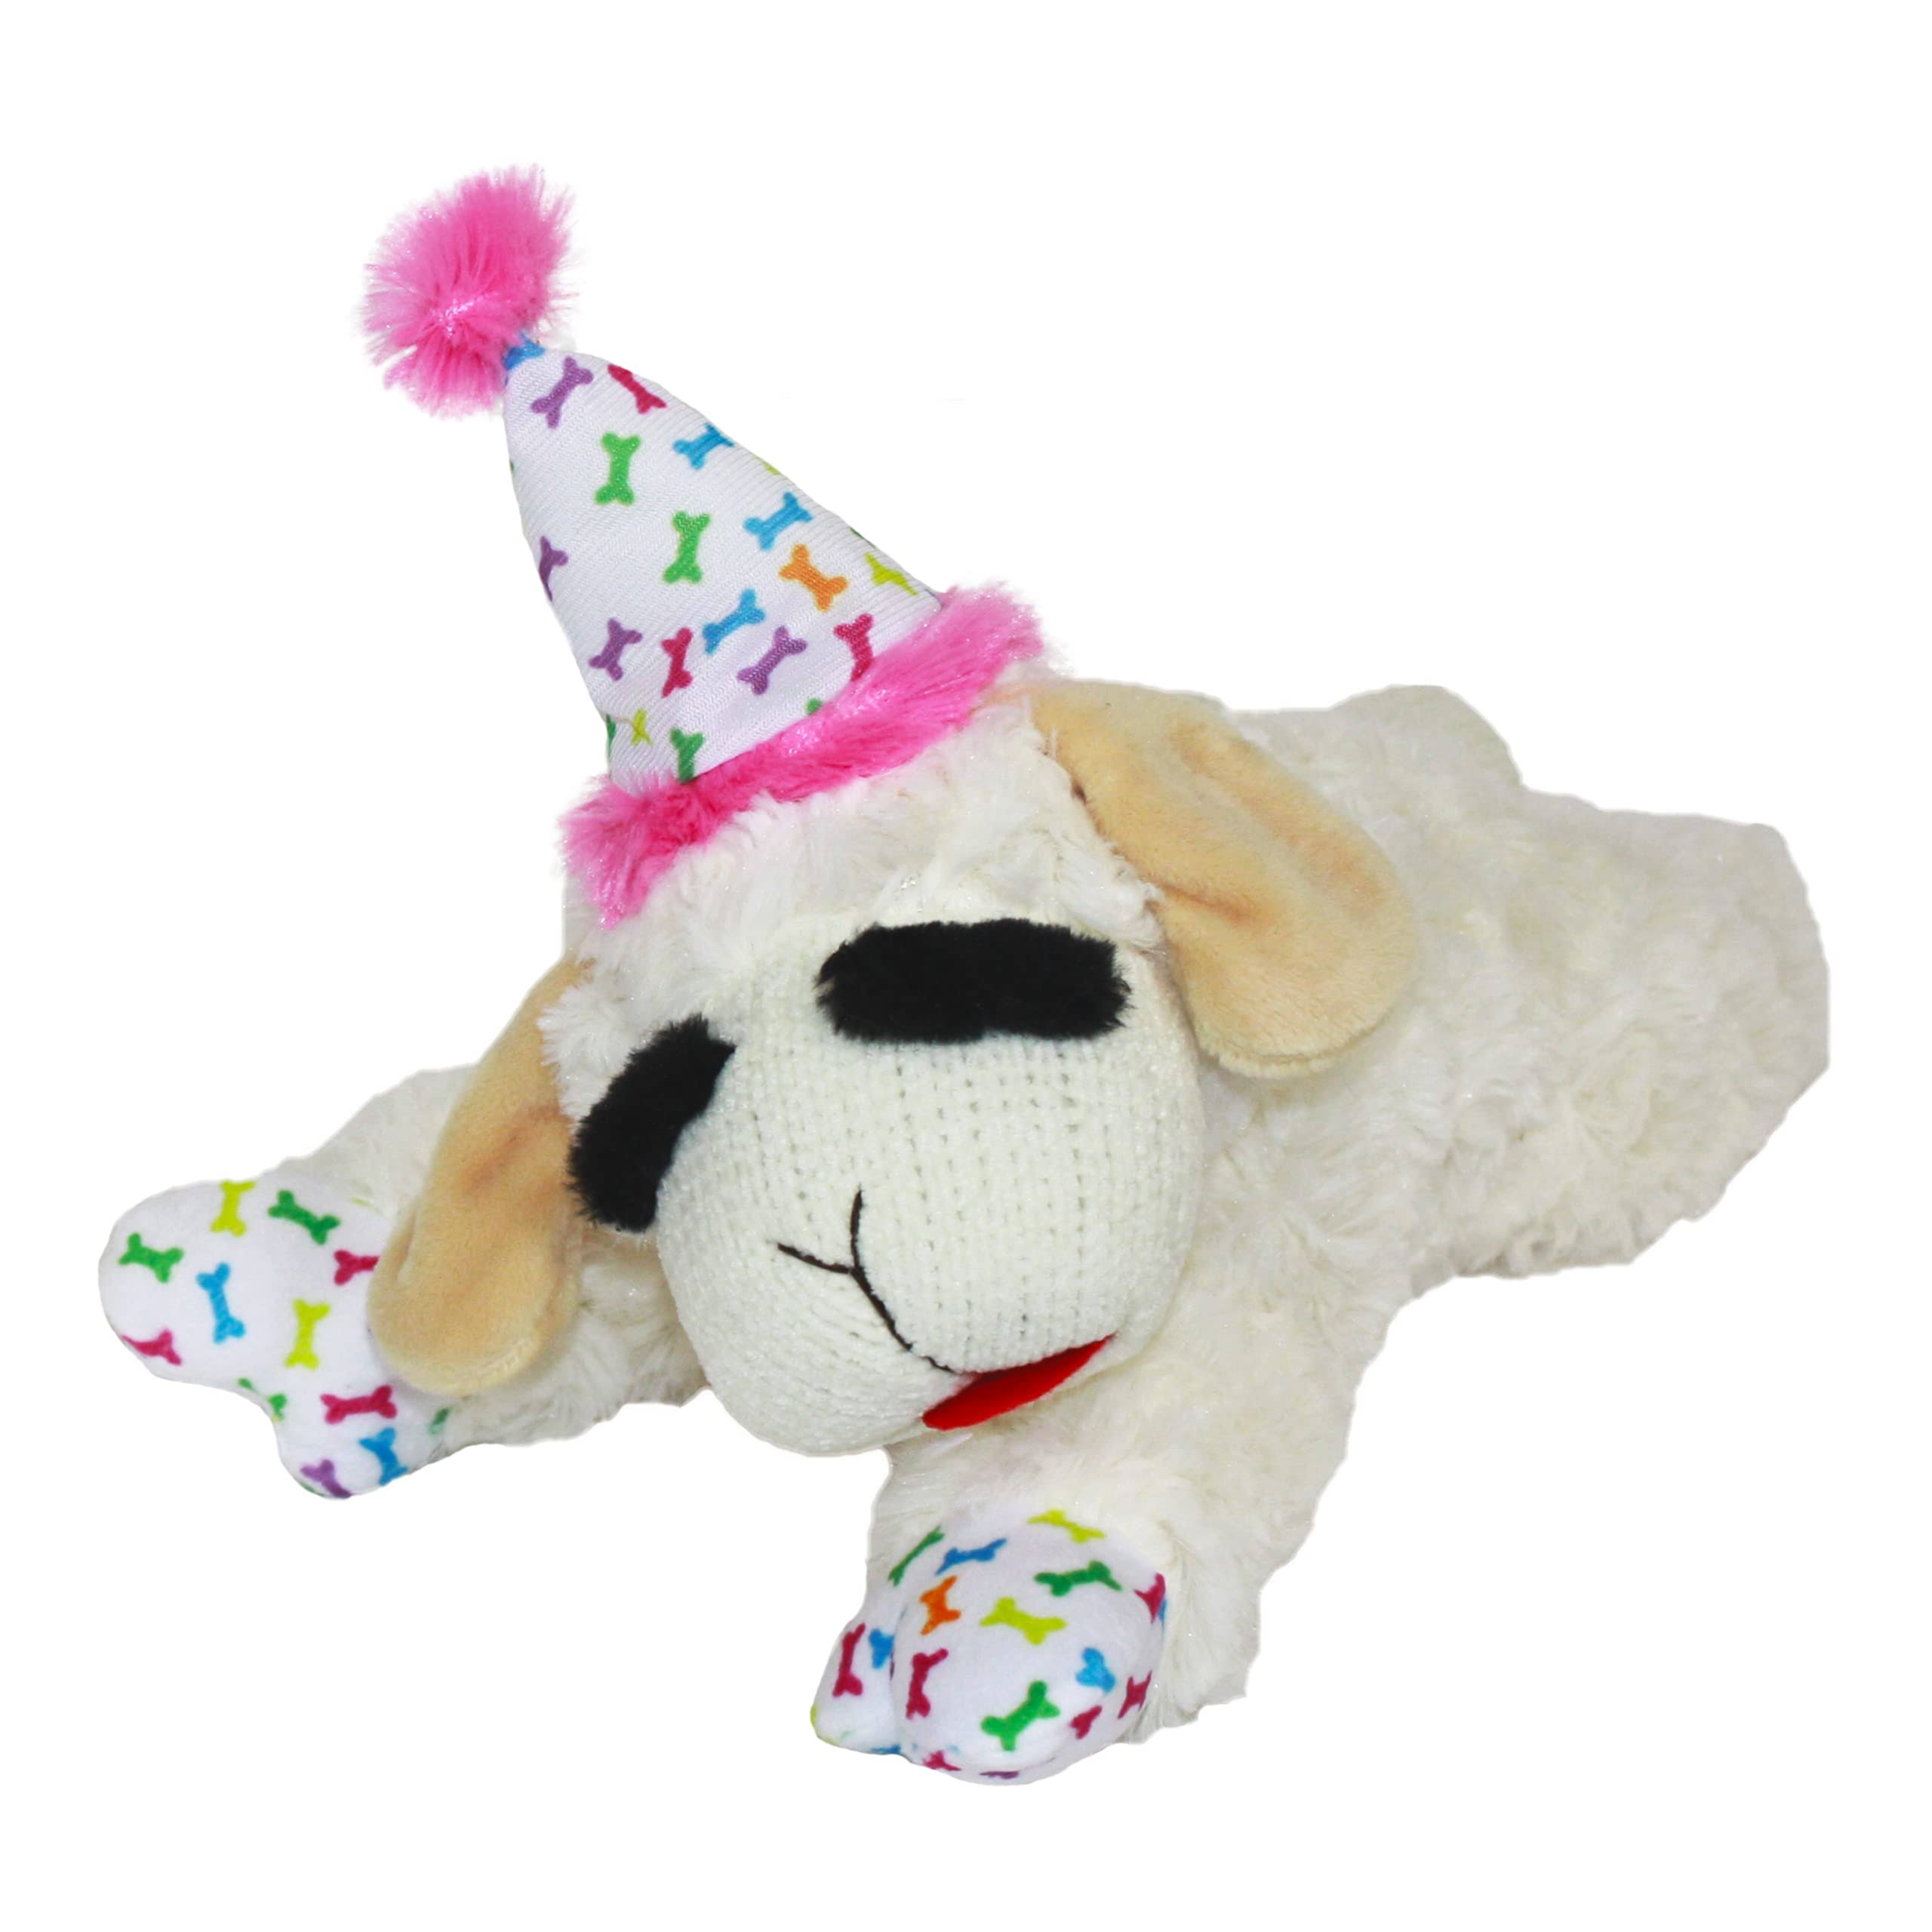 Lamb Chop Dog Toy with Birthday Hat, Pink, 10.5"